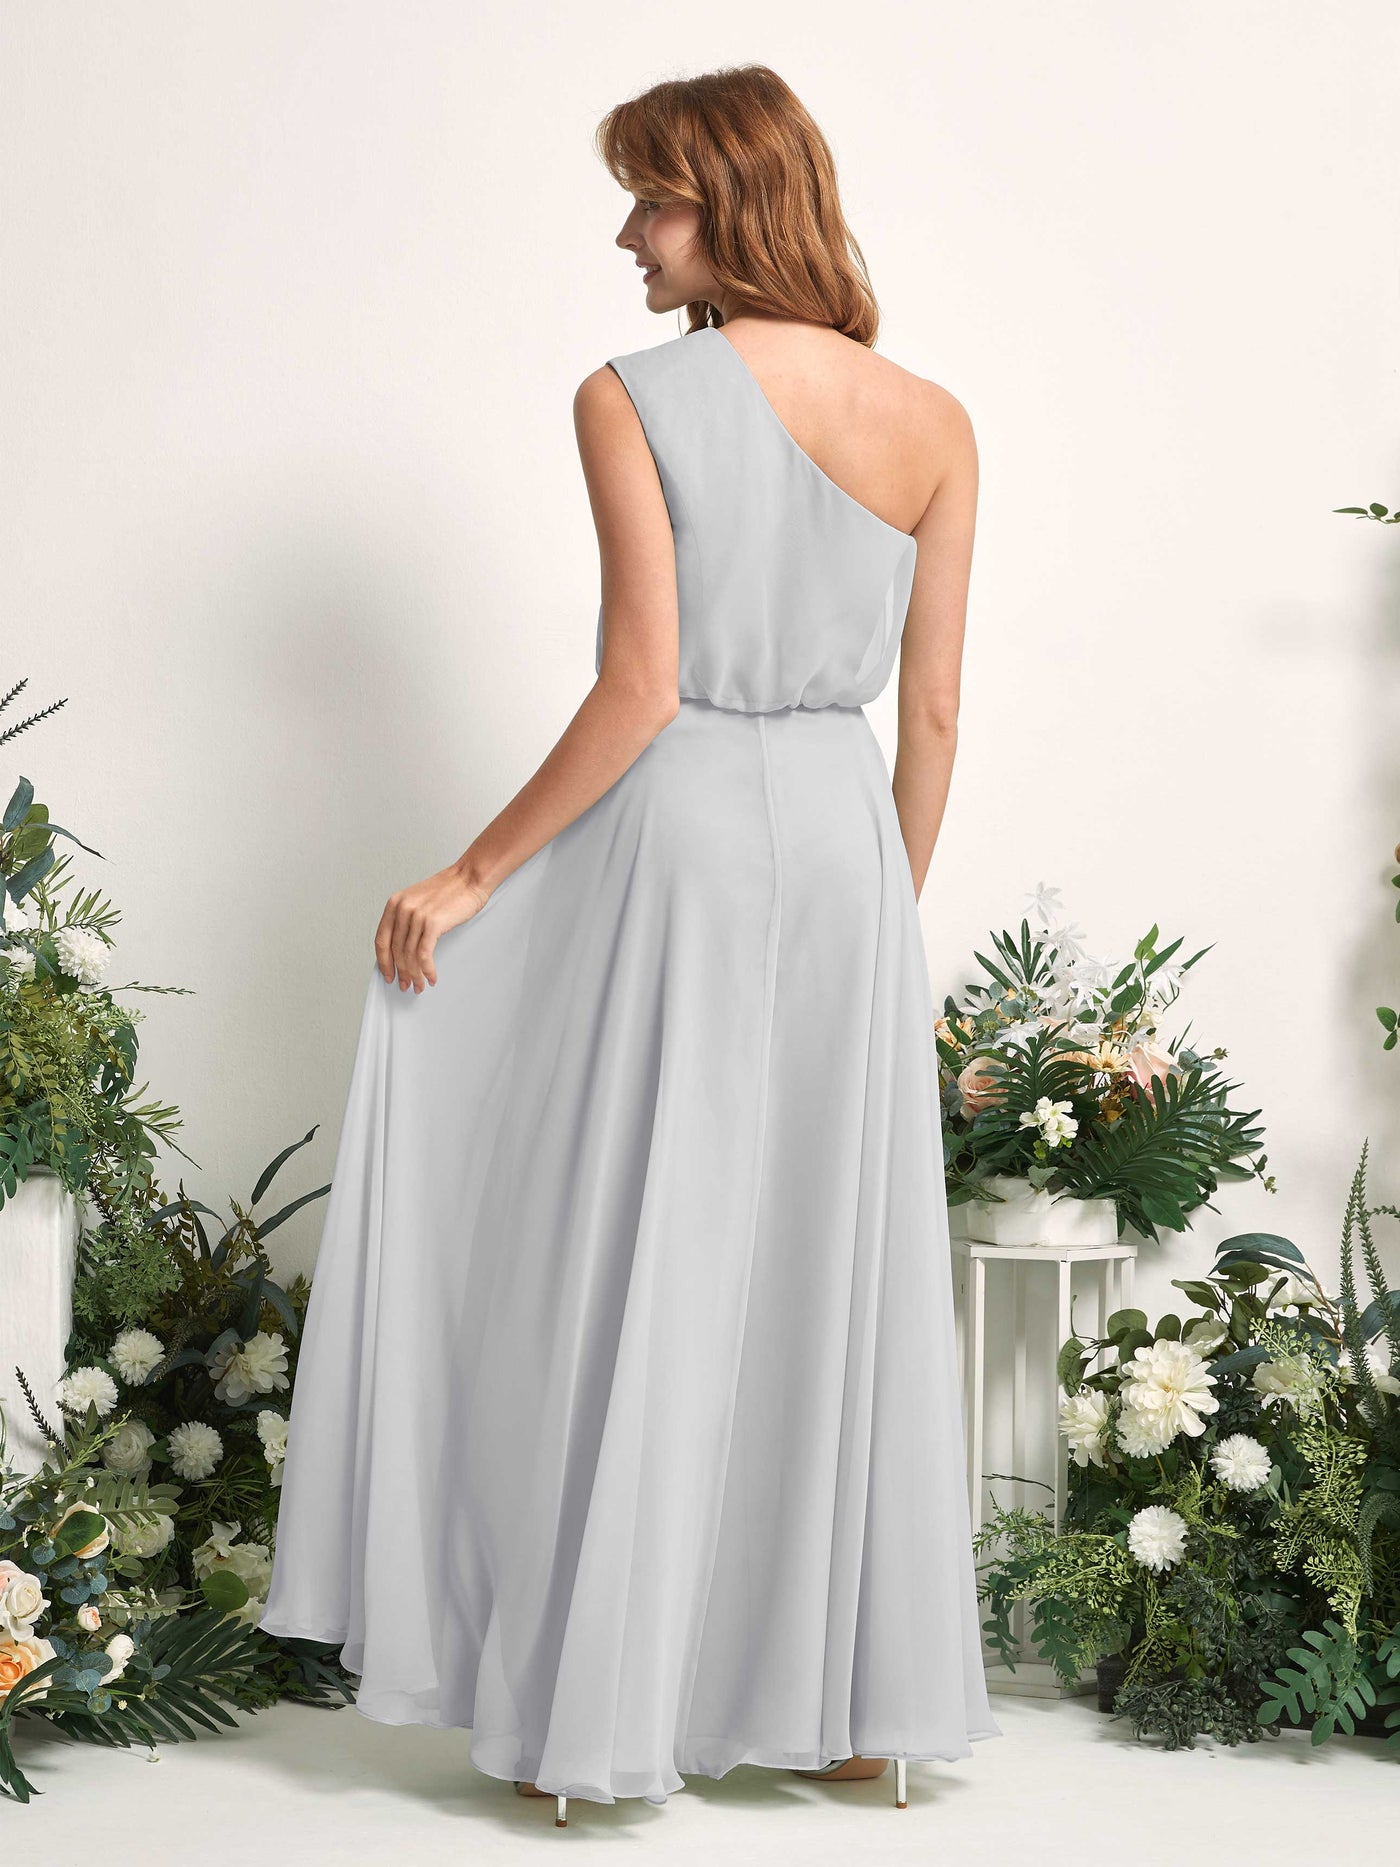 Bridesmaid Dress A-line Chiffon One Shoulder Full Length Sleeveless Wedding Party Dress - Silver (81226827)#color_silver